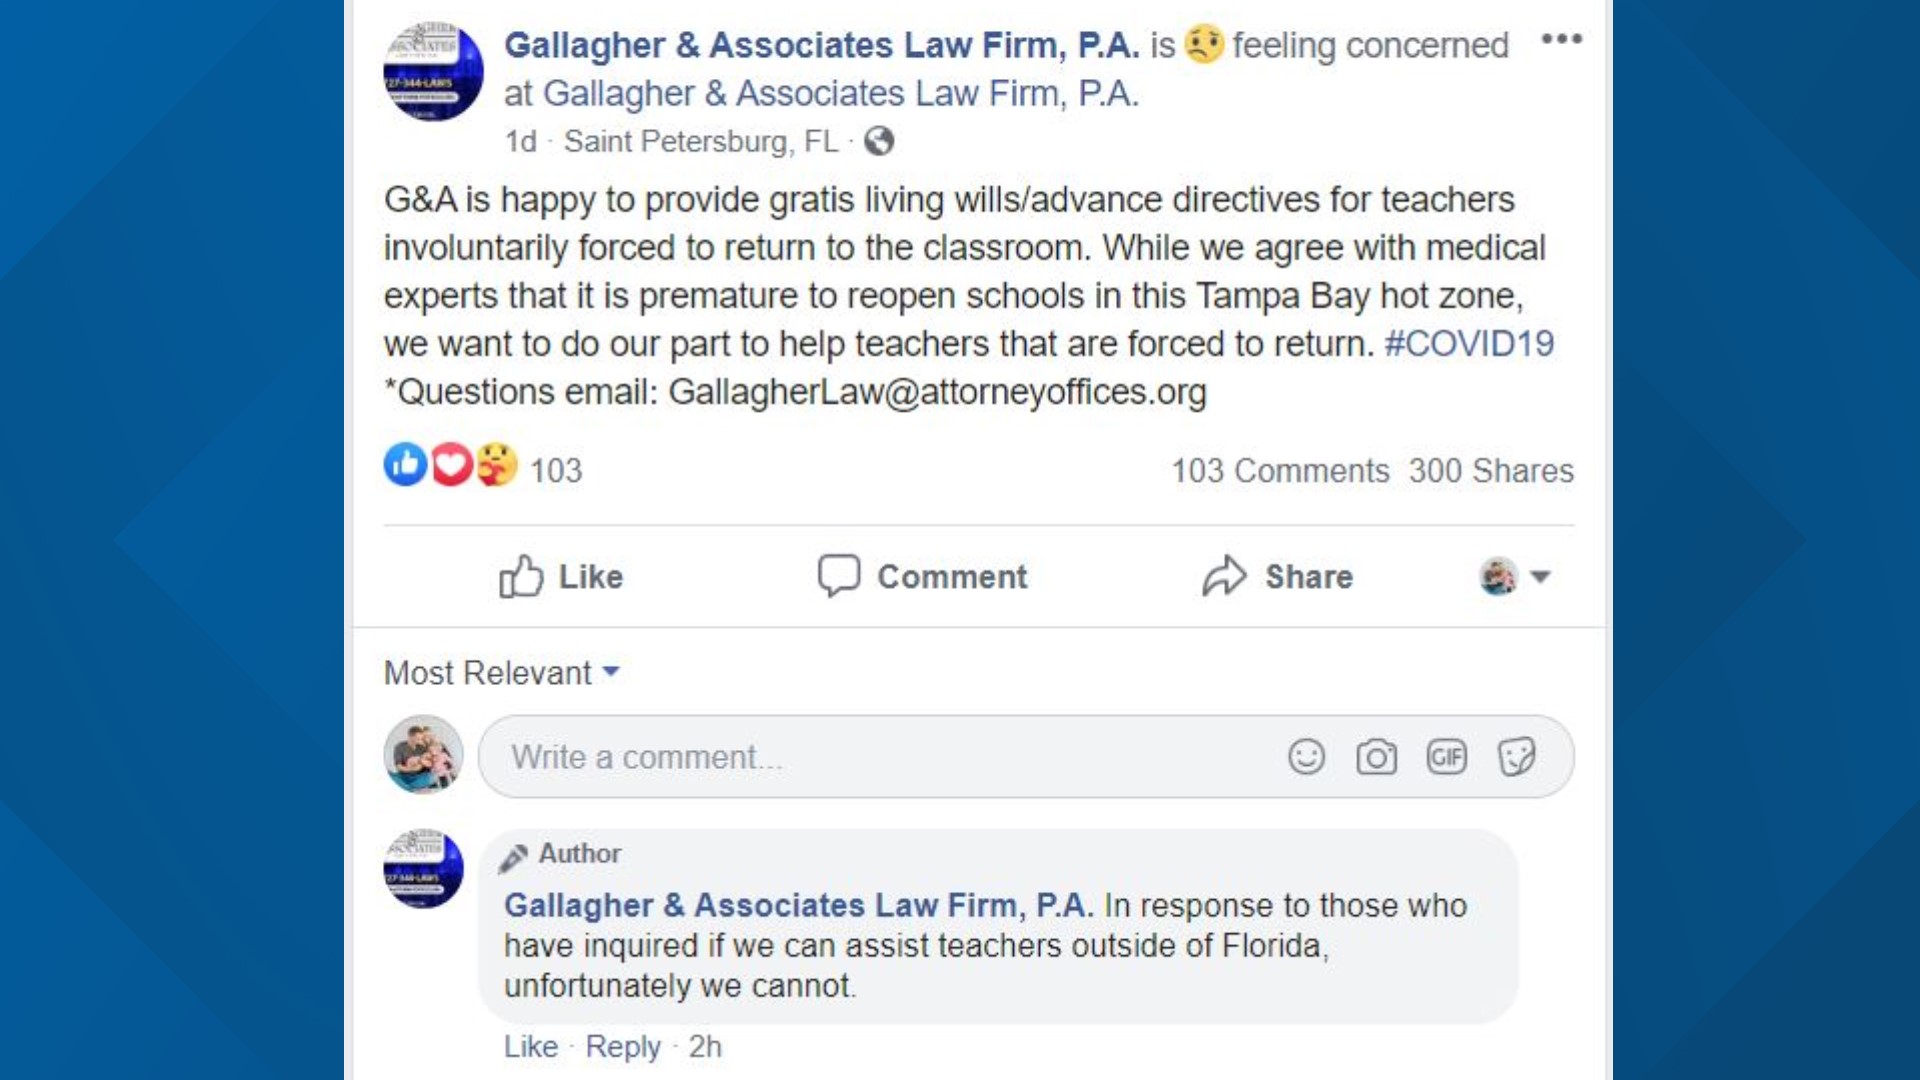 A St. Petersburg attorney is offering living wills free of charge for teachers returning to the classroom amid the coronavirus pandemic.